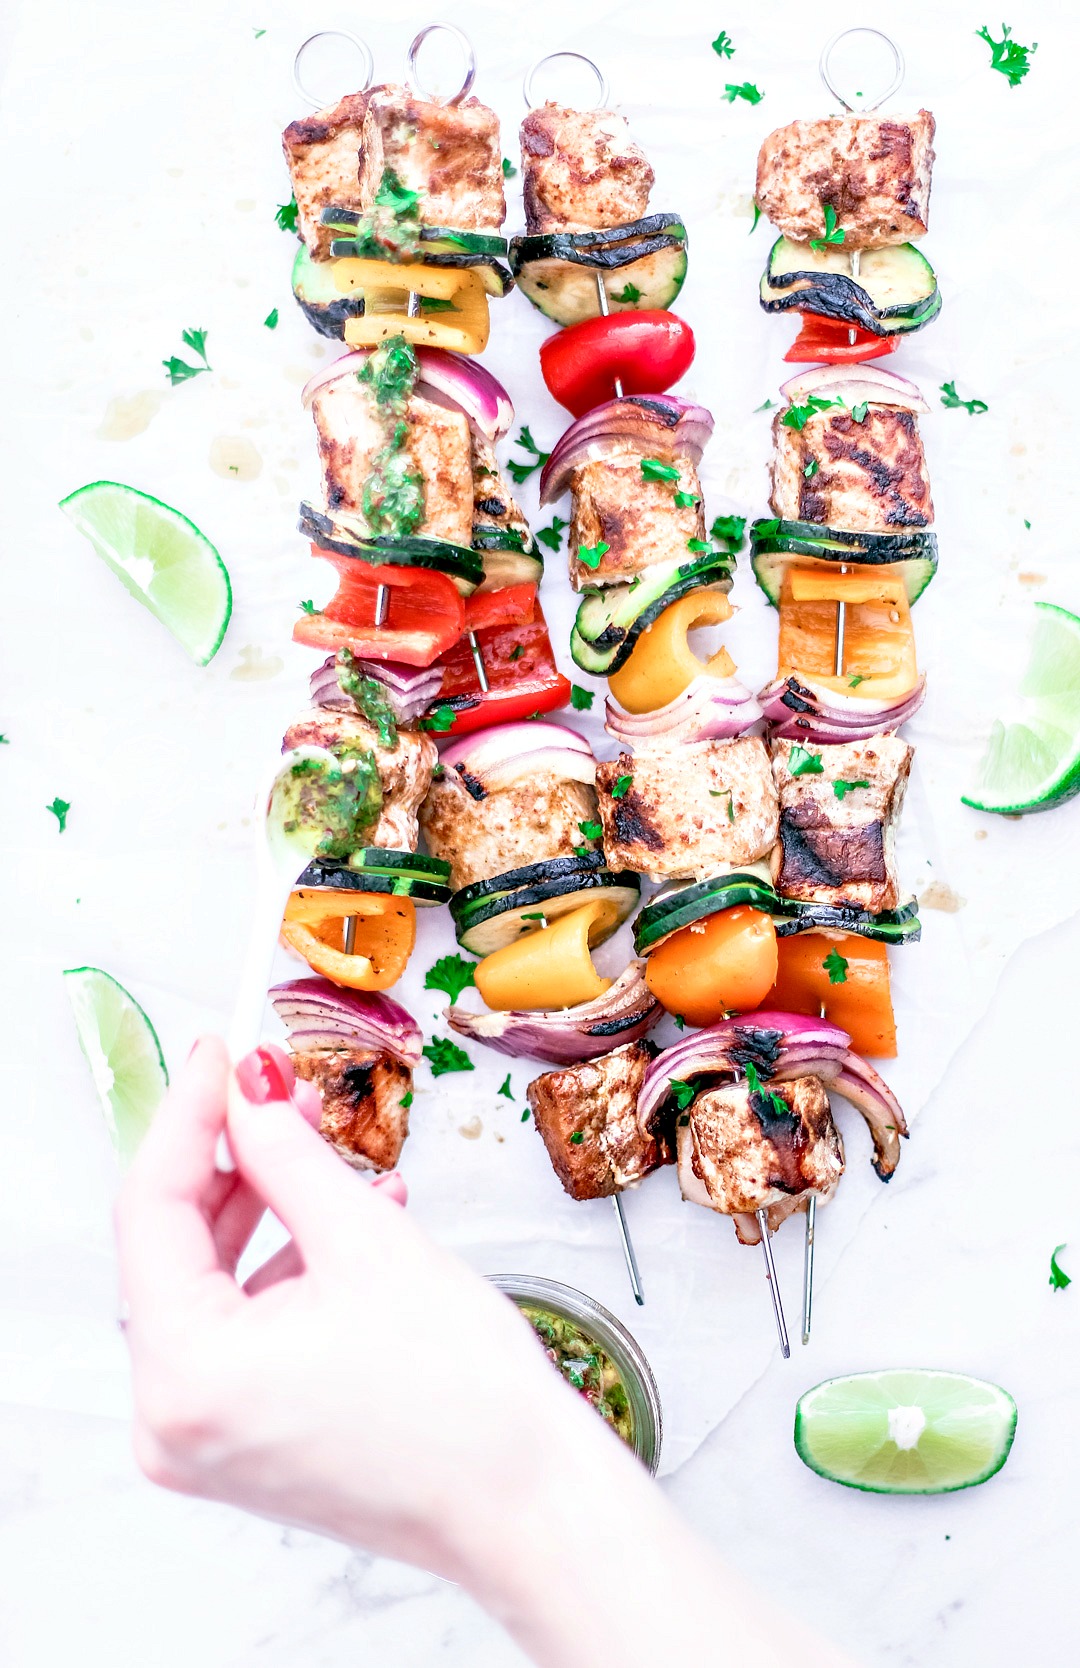 Easy Grilled Salmon Kebabs With Homemade Chimichurri Sauce